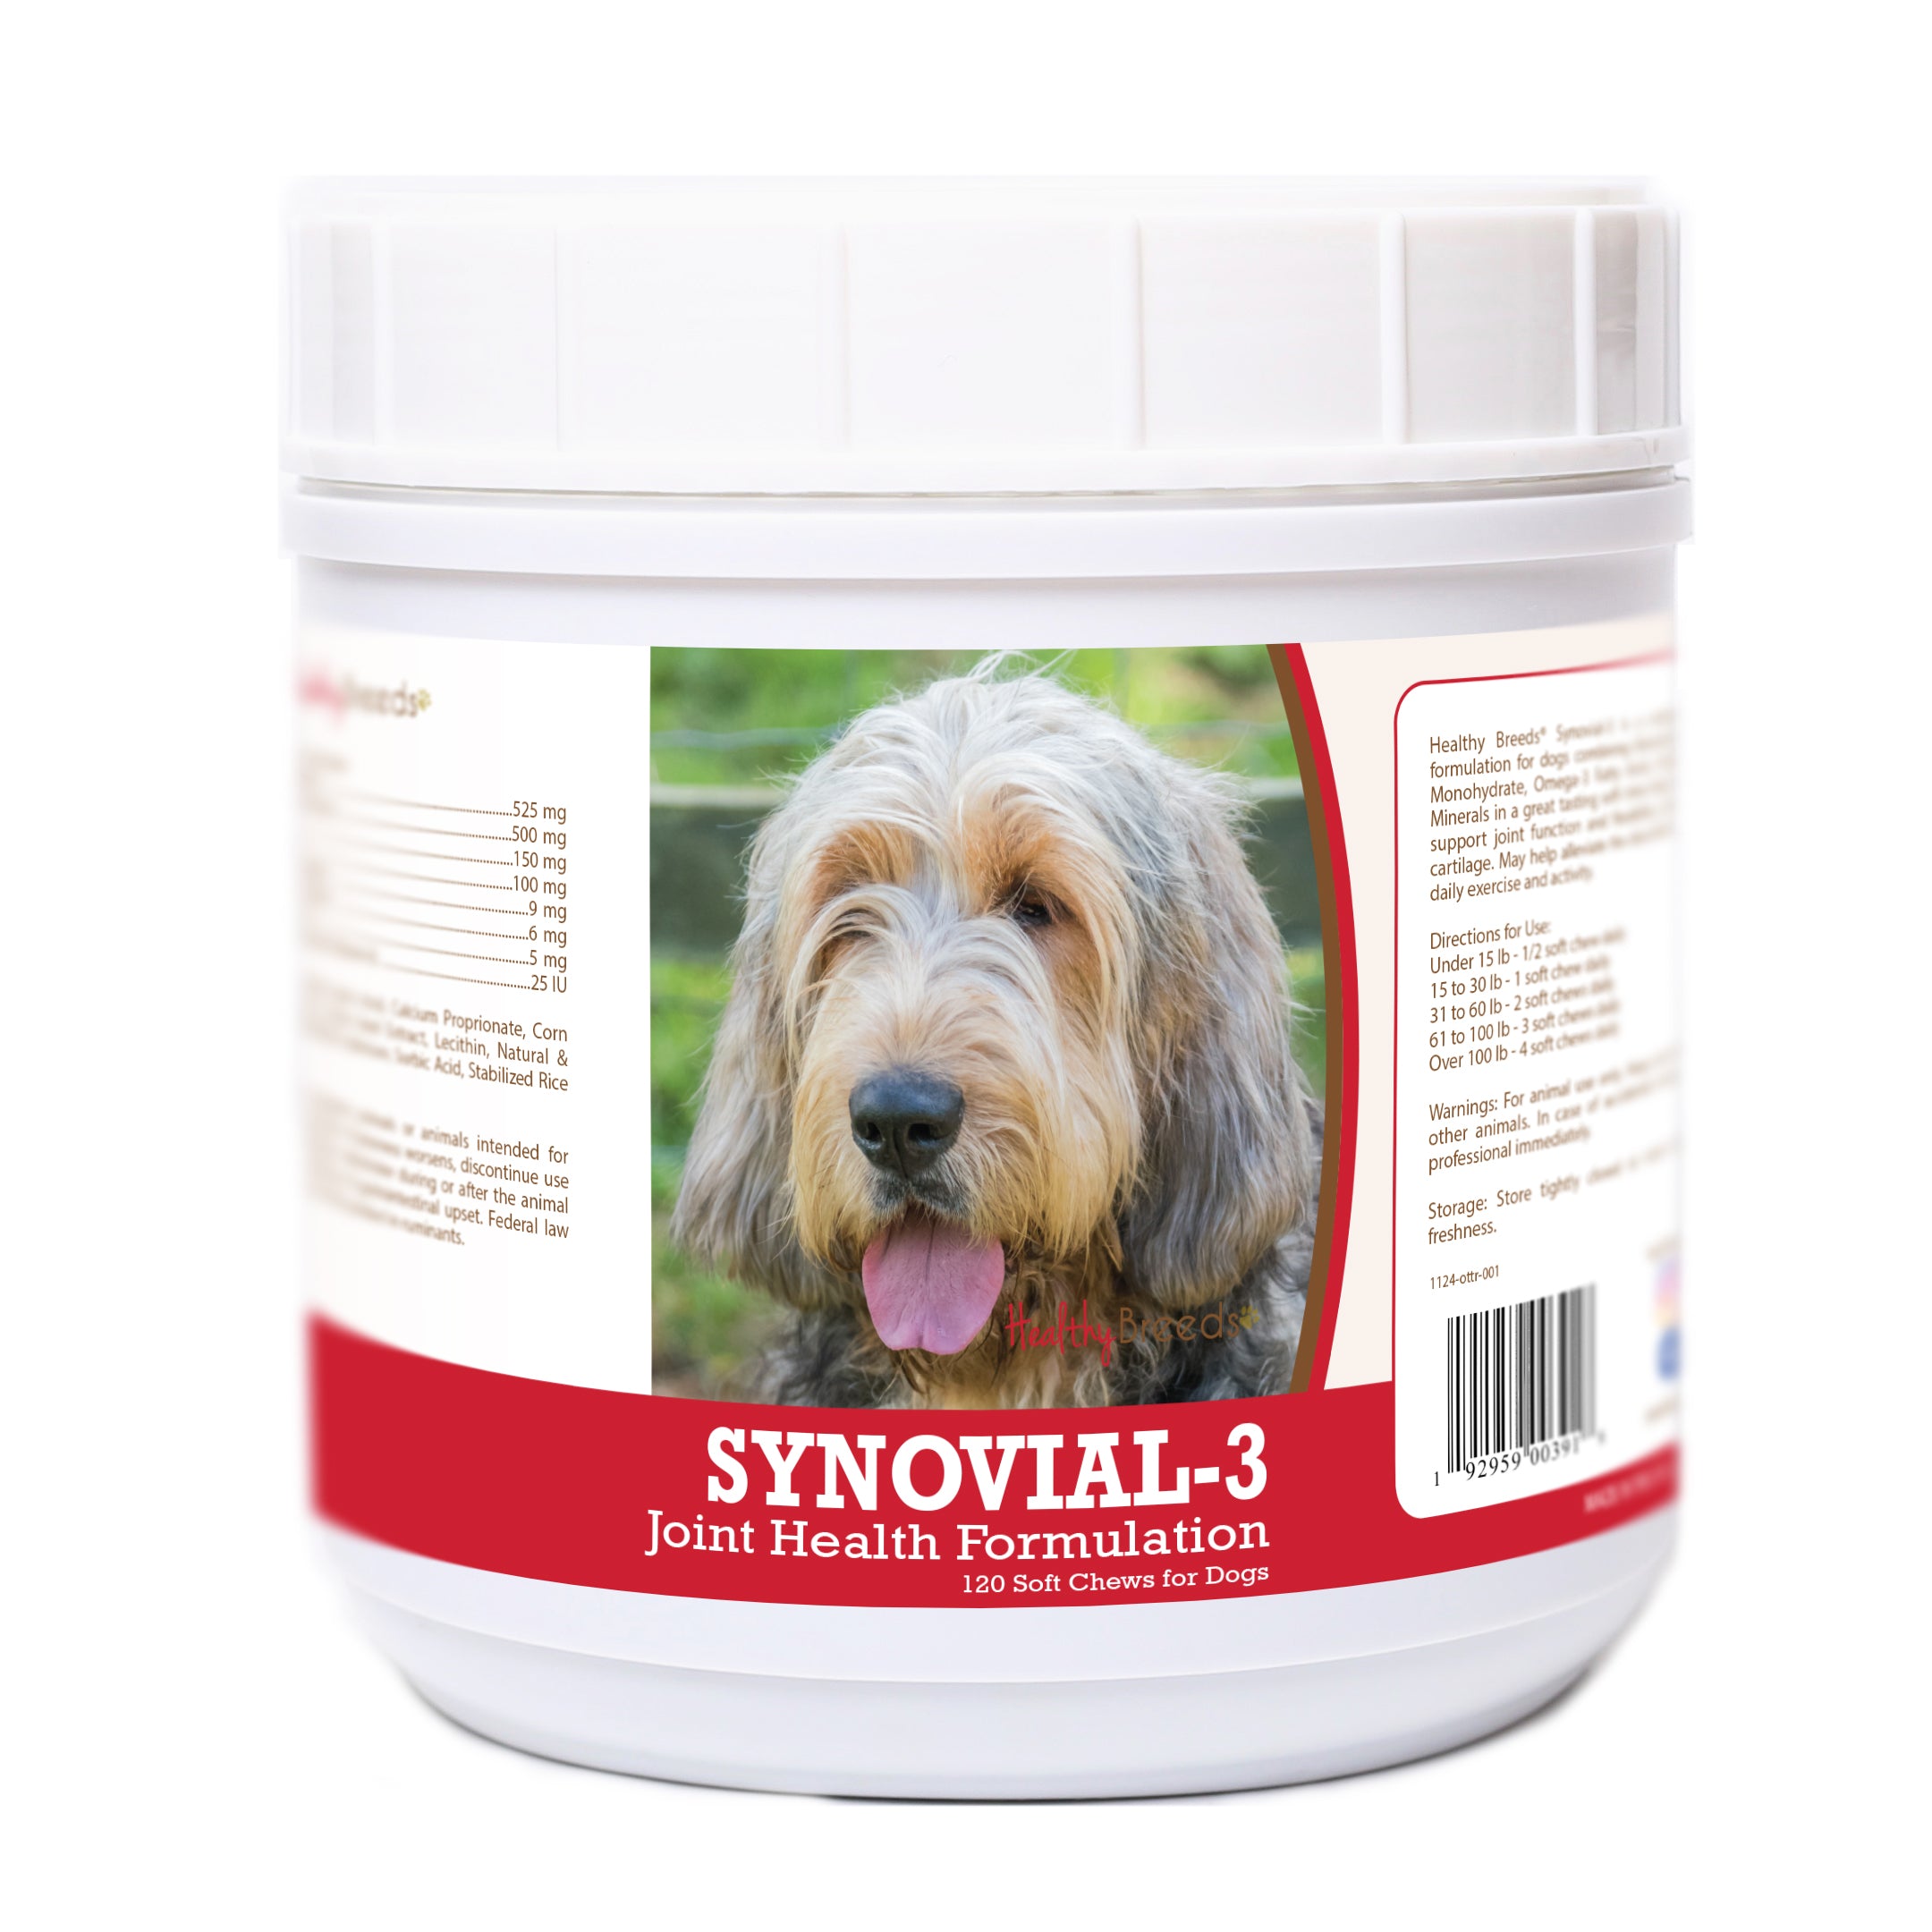 Otterhound Synovial-3 Joint Health Formulation Soft Chews 120 Count